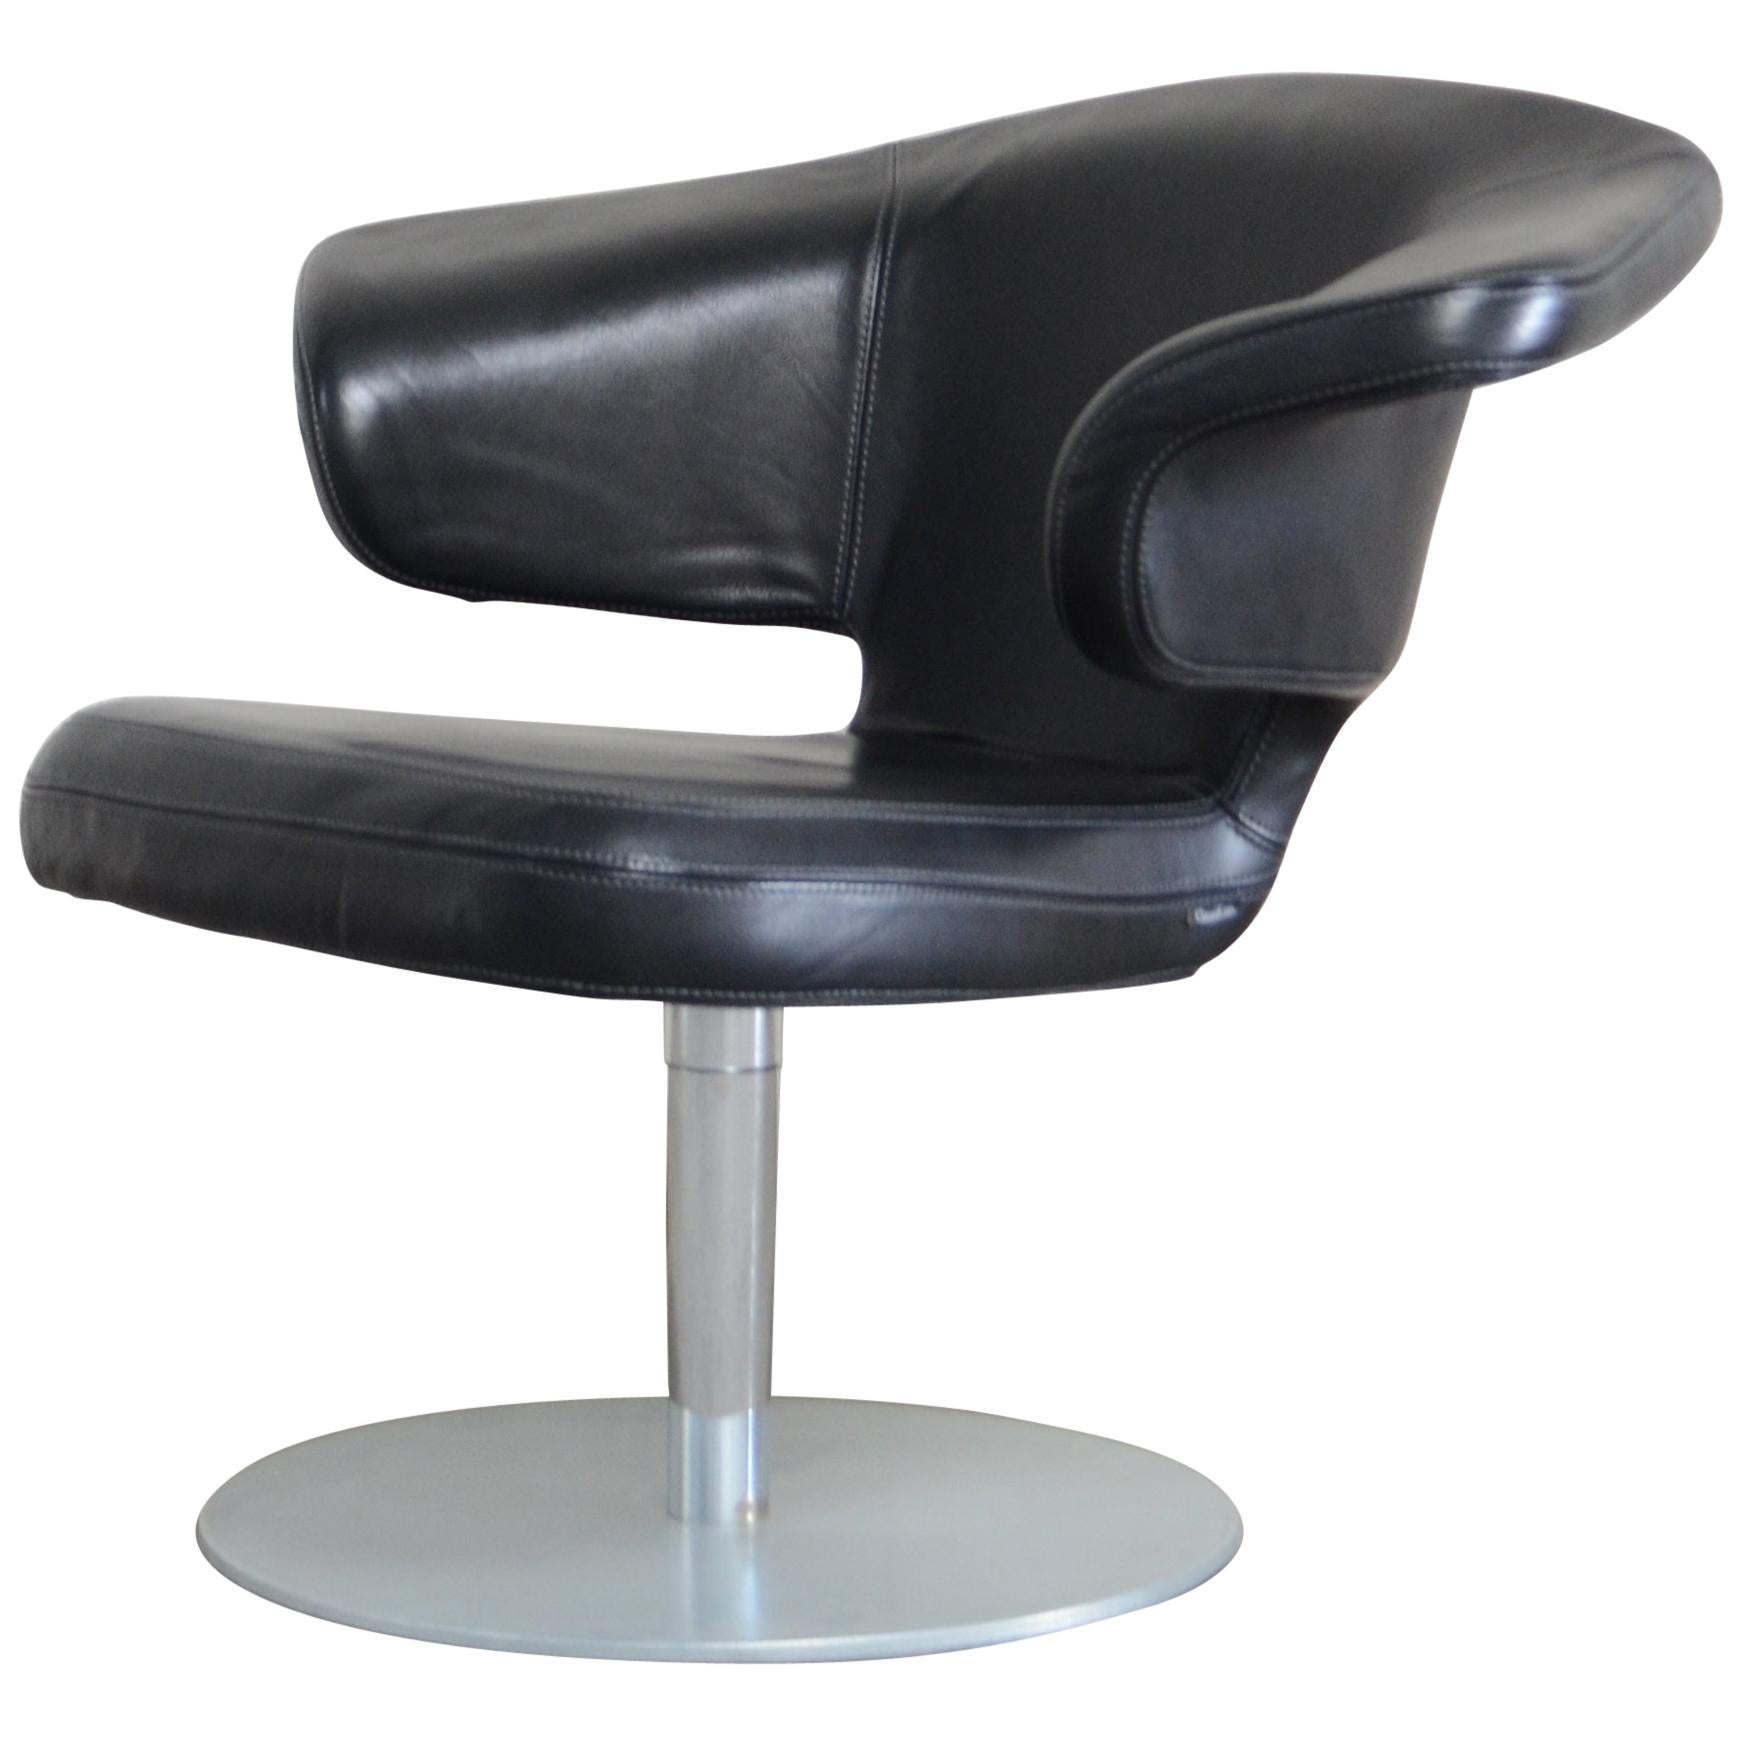 Rare Prototype of ClassiCon Munich Lounge Chair Black Leather